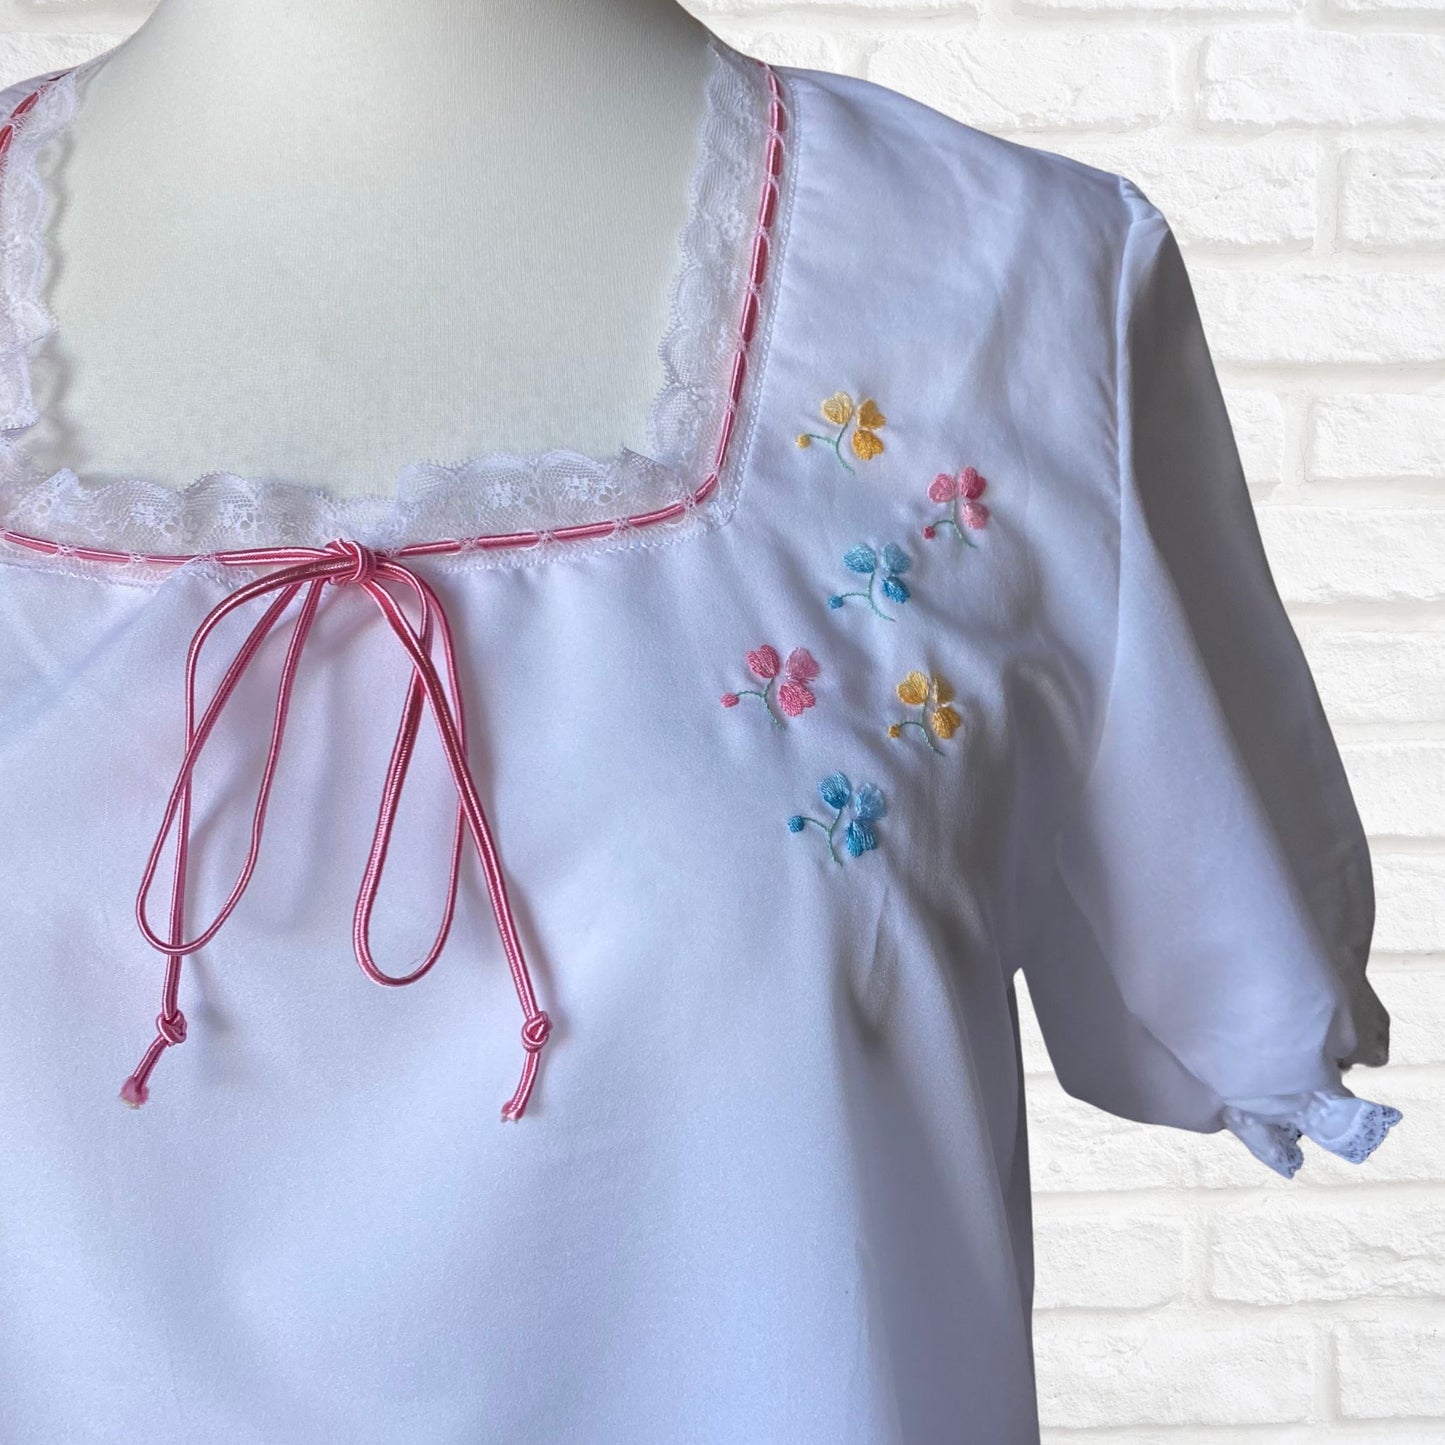 Vintage white puff sleeved nightgown with pink embroidered flower detail. Approx UK size 14-20